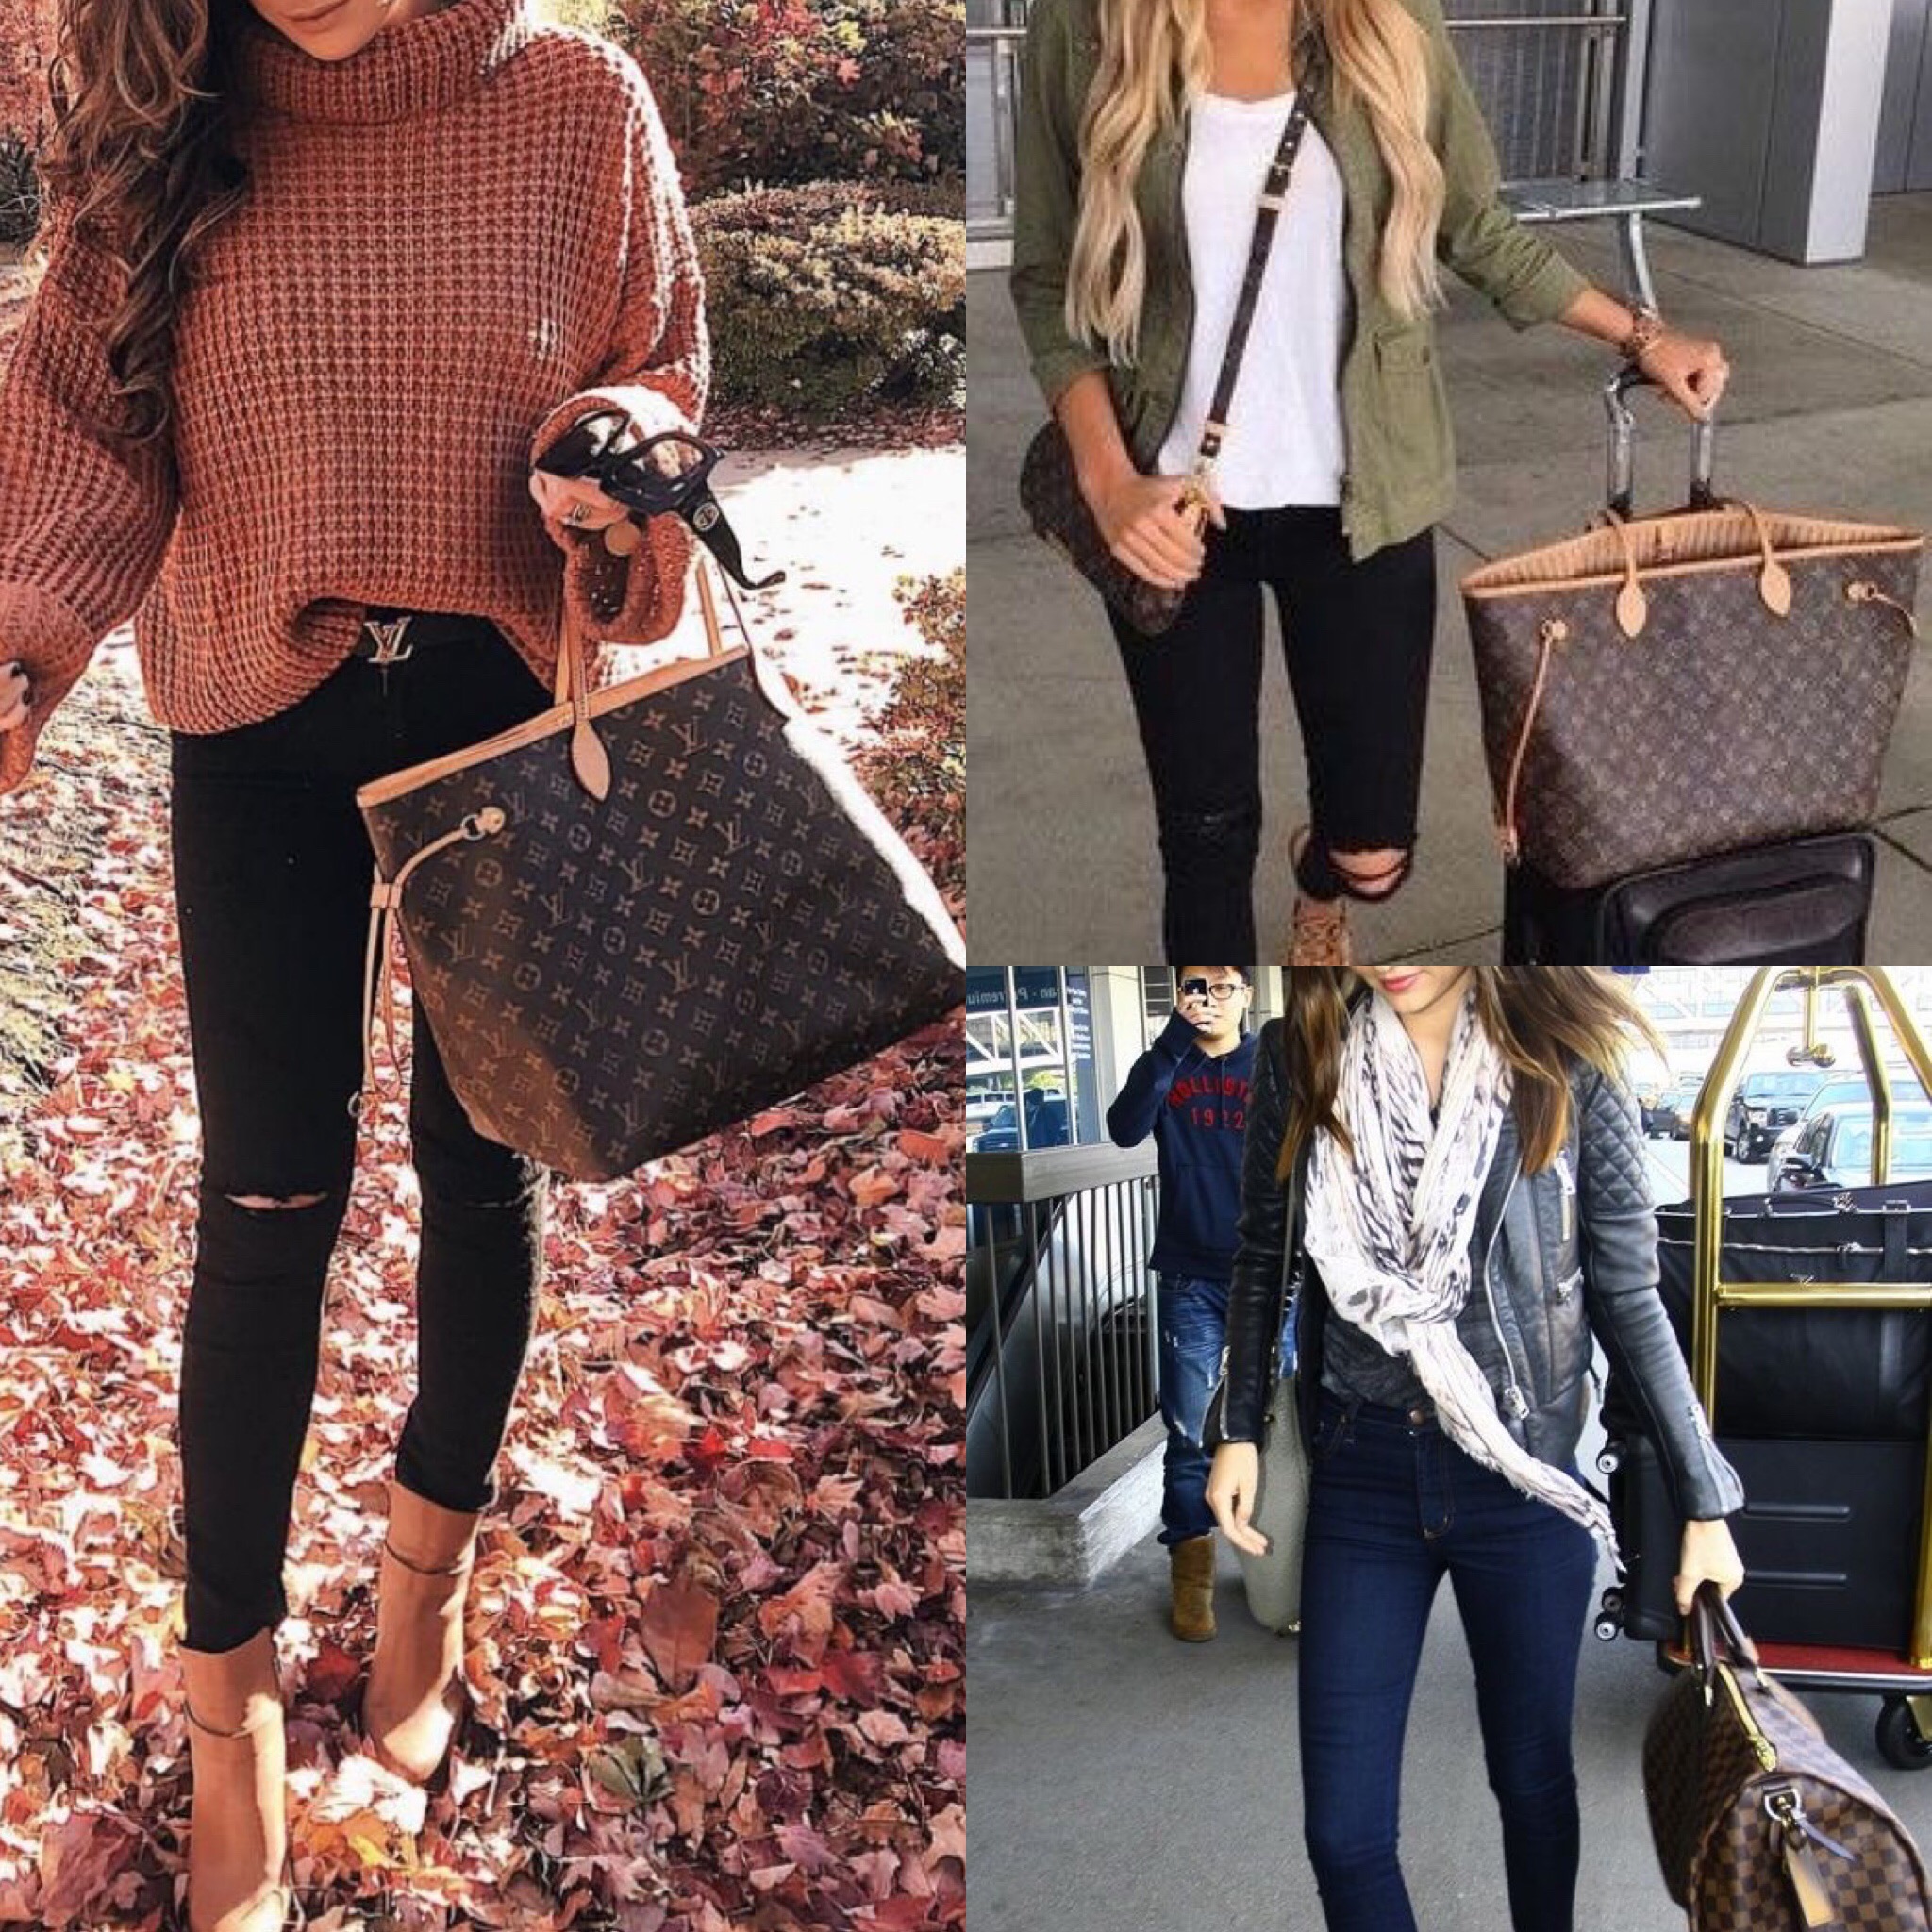 Louis Vuitton: How to Spot a Real From Fake - BellyitchBlog